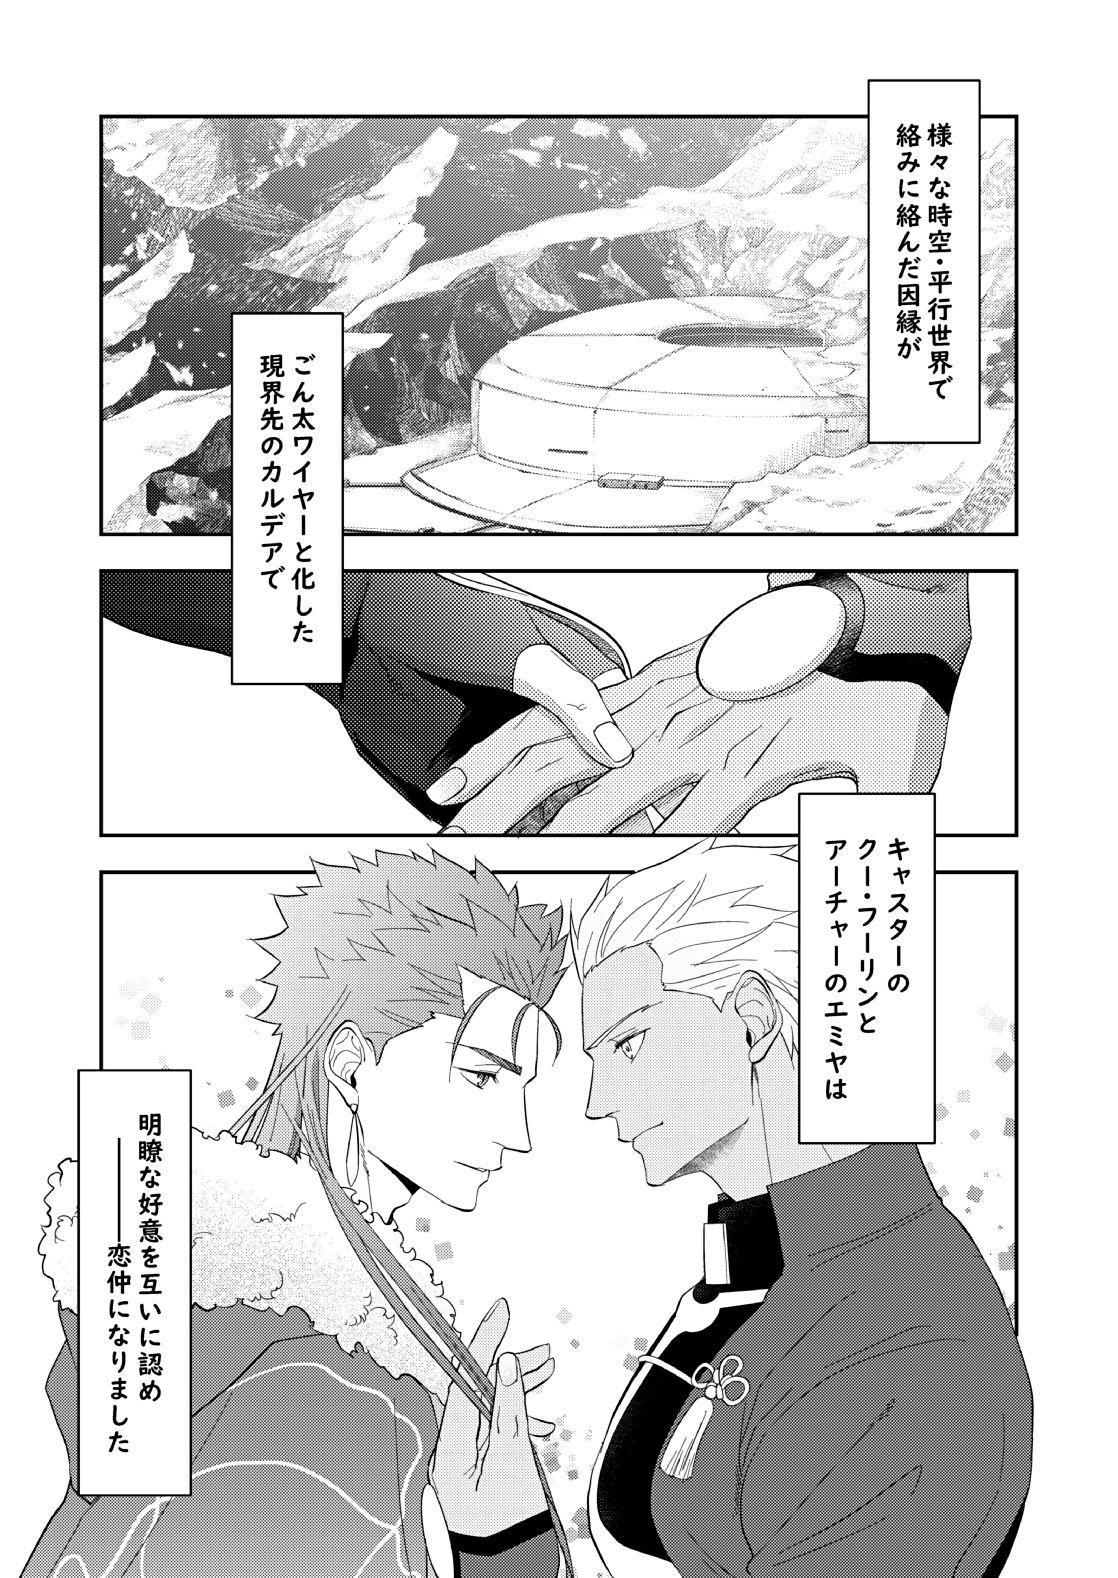 Gay deification - Fate grand order Hardcore Sex - Page 3